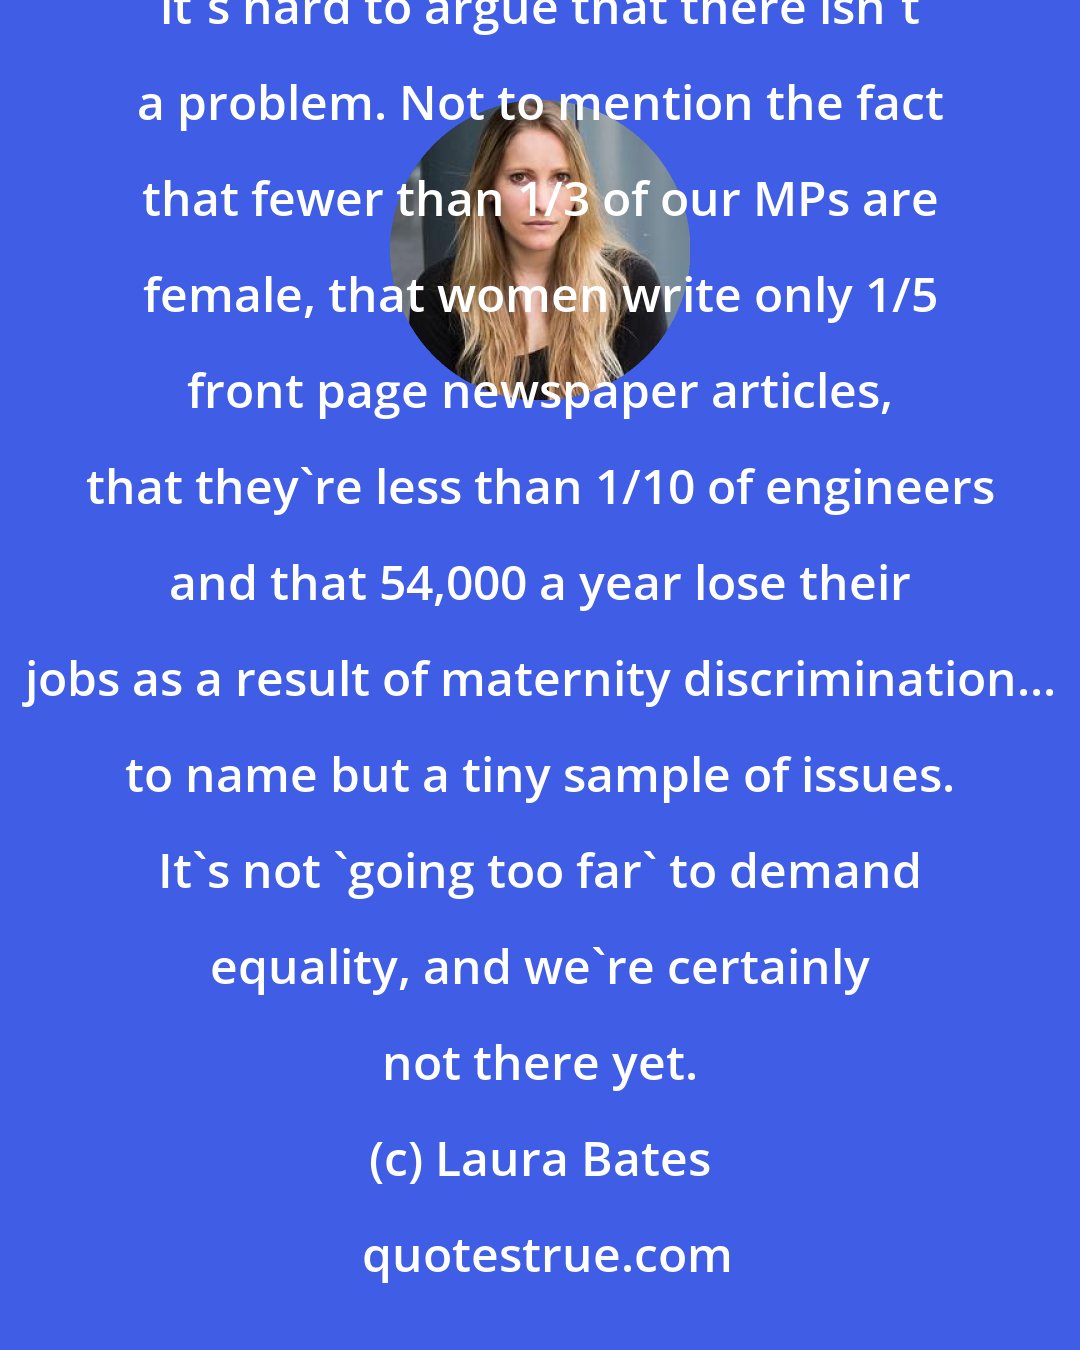 Laura Bates: As long as 85,000 women are raped every year and 400,000 sexually assaulted in England and Wales alone, it's hard to argue that there isn't a problem. Not to mention the fact that fewer than 1/3 of our MPs are female, that women write only 1/5 front page newspaper articles, that they're less than 1/10 of engineers and that 54,000 a year lose their jobs as a result of maternity discrimination... to name but a tiny sample of issues. It's not 'going too far' to demand equality, and we're certainly not there yet.